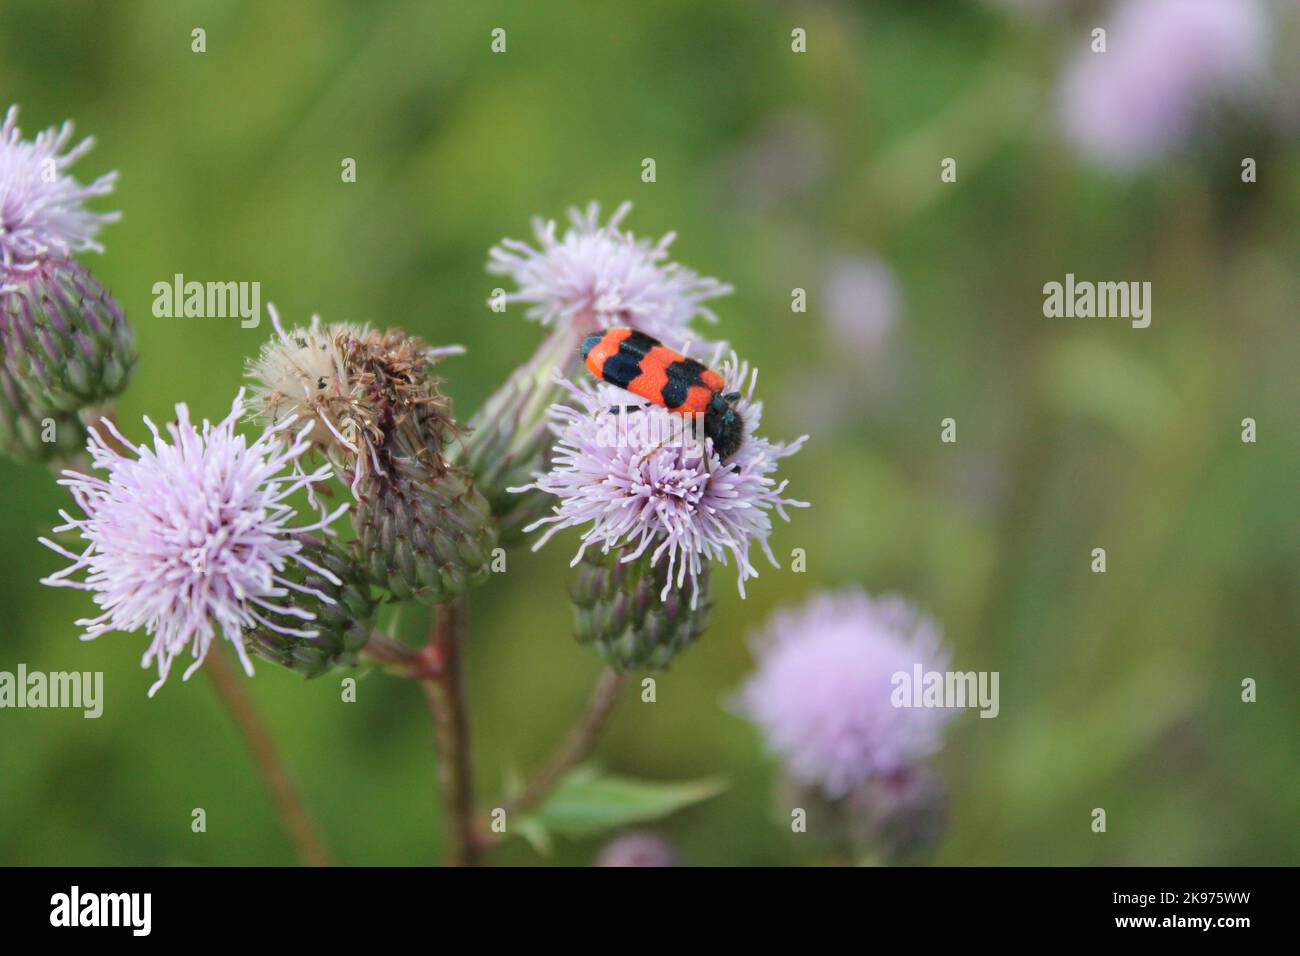 The close-up view of a Trichodes apiarius on a thistle plant in the greenery Stock Photo